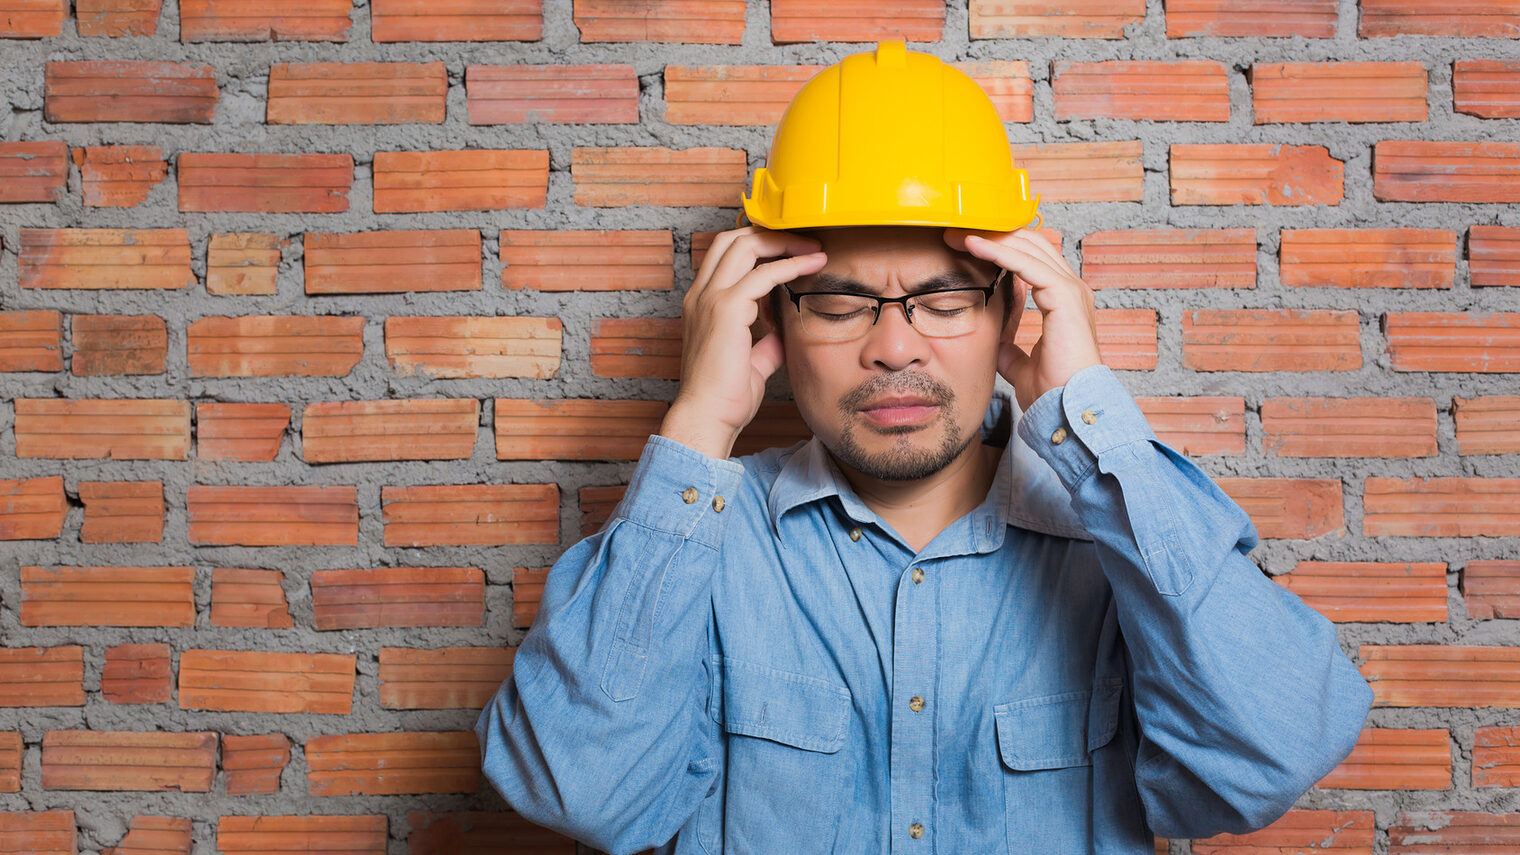 asian, background, brick, construction, engineer, engineering, equipment, eyeglass, factory, foreman, grey, hardhat, head, headache, helmet, industrial, industry, male, man, manufacturing, people, person, plant, portrait, professional, safety, serious, strain, stress, technician, wall, worker, workers, workman, workplace, asian, background, brick, construction, engineer, engineering, equipment, eyeglass, factory, foreman, grey, hardhat, head, headache, helmet, industrial, industry, male, man, manufacturing, people, person, plant, portrait, professional, safety, serious, strain, stress, technician, wall, worker, workers, workman, workplace